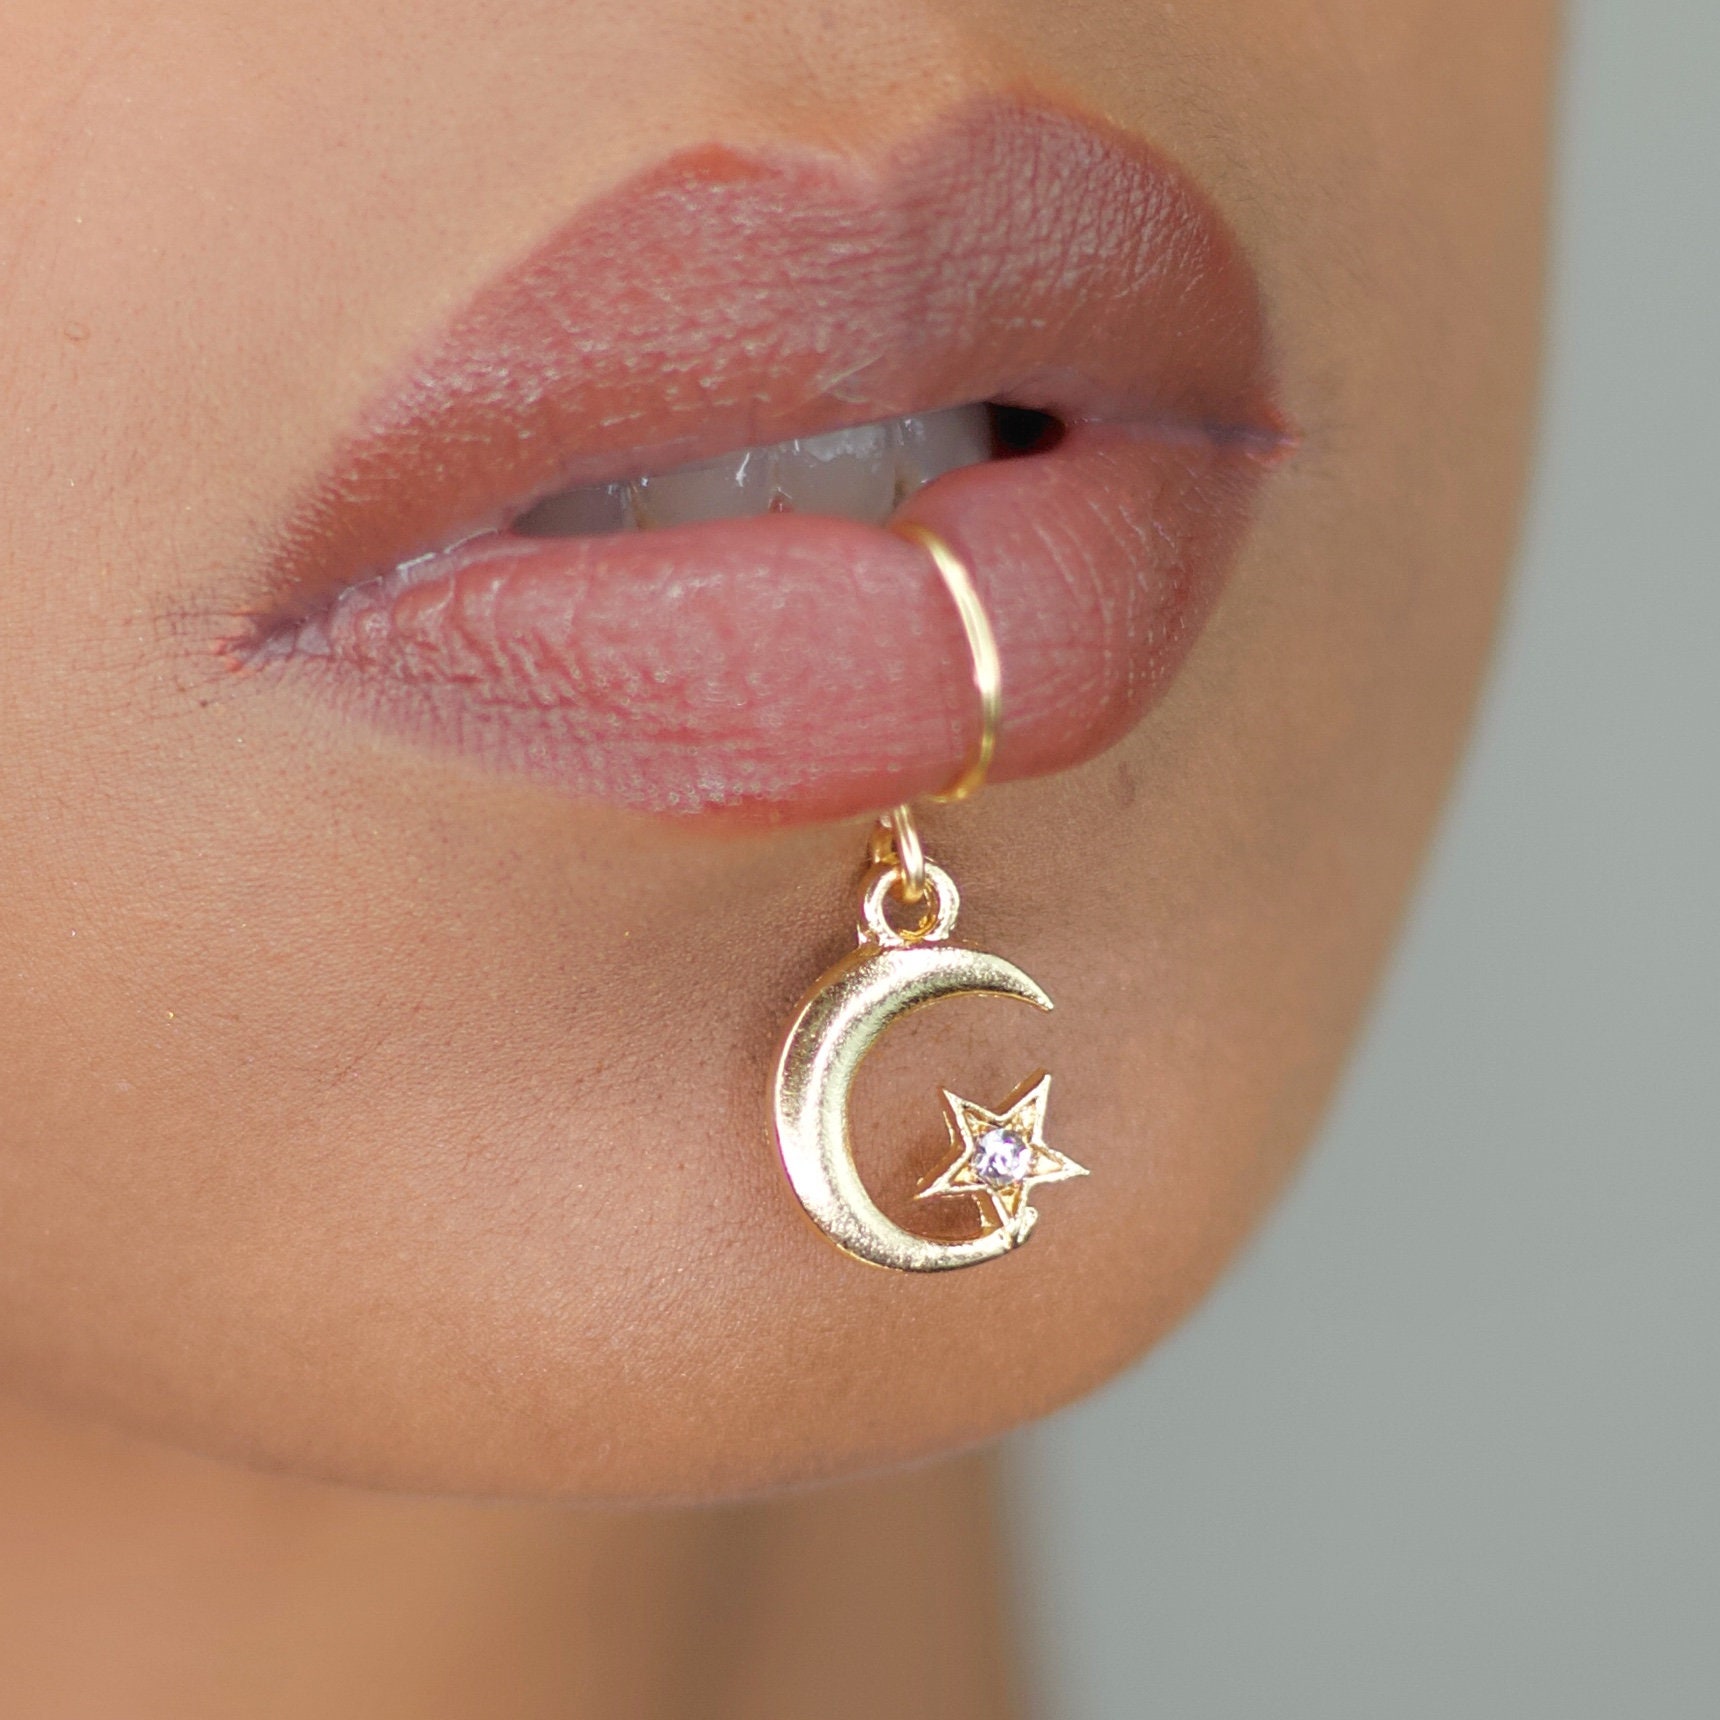 Fake Nose Ring Baddie Aesthetic Sparkly Nose Stud Faux Nose Clip on  Butterfly Heart Star Charm Gift for Her 